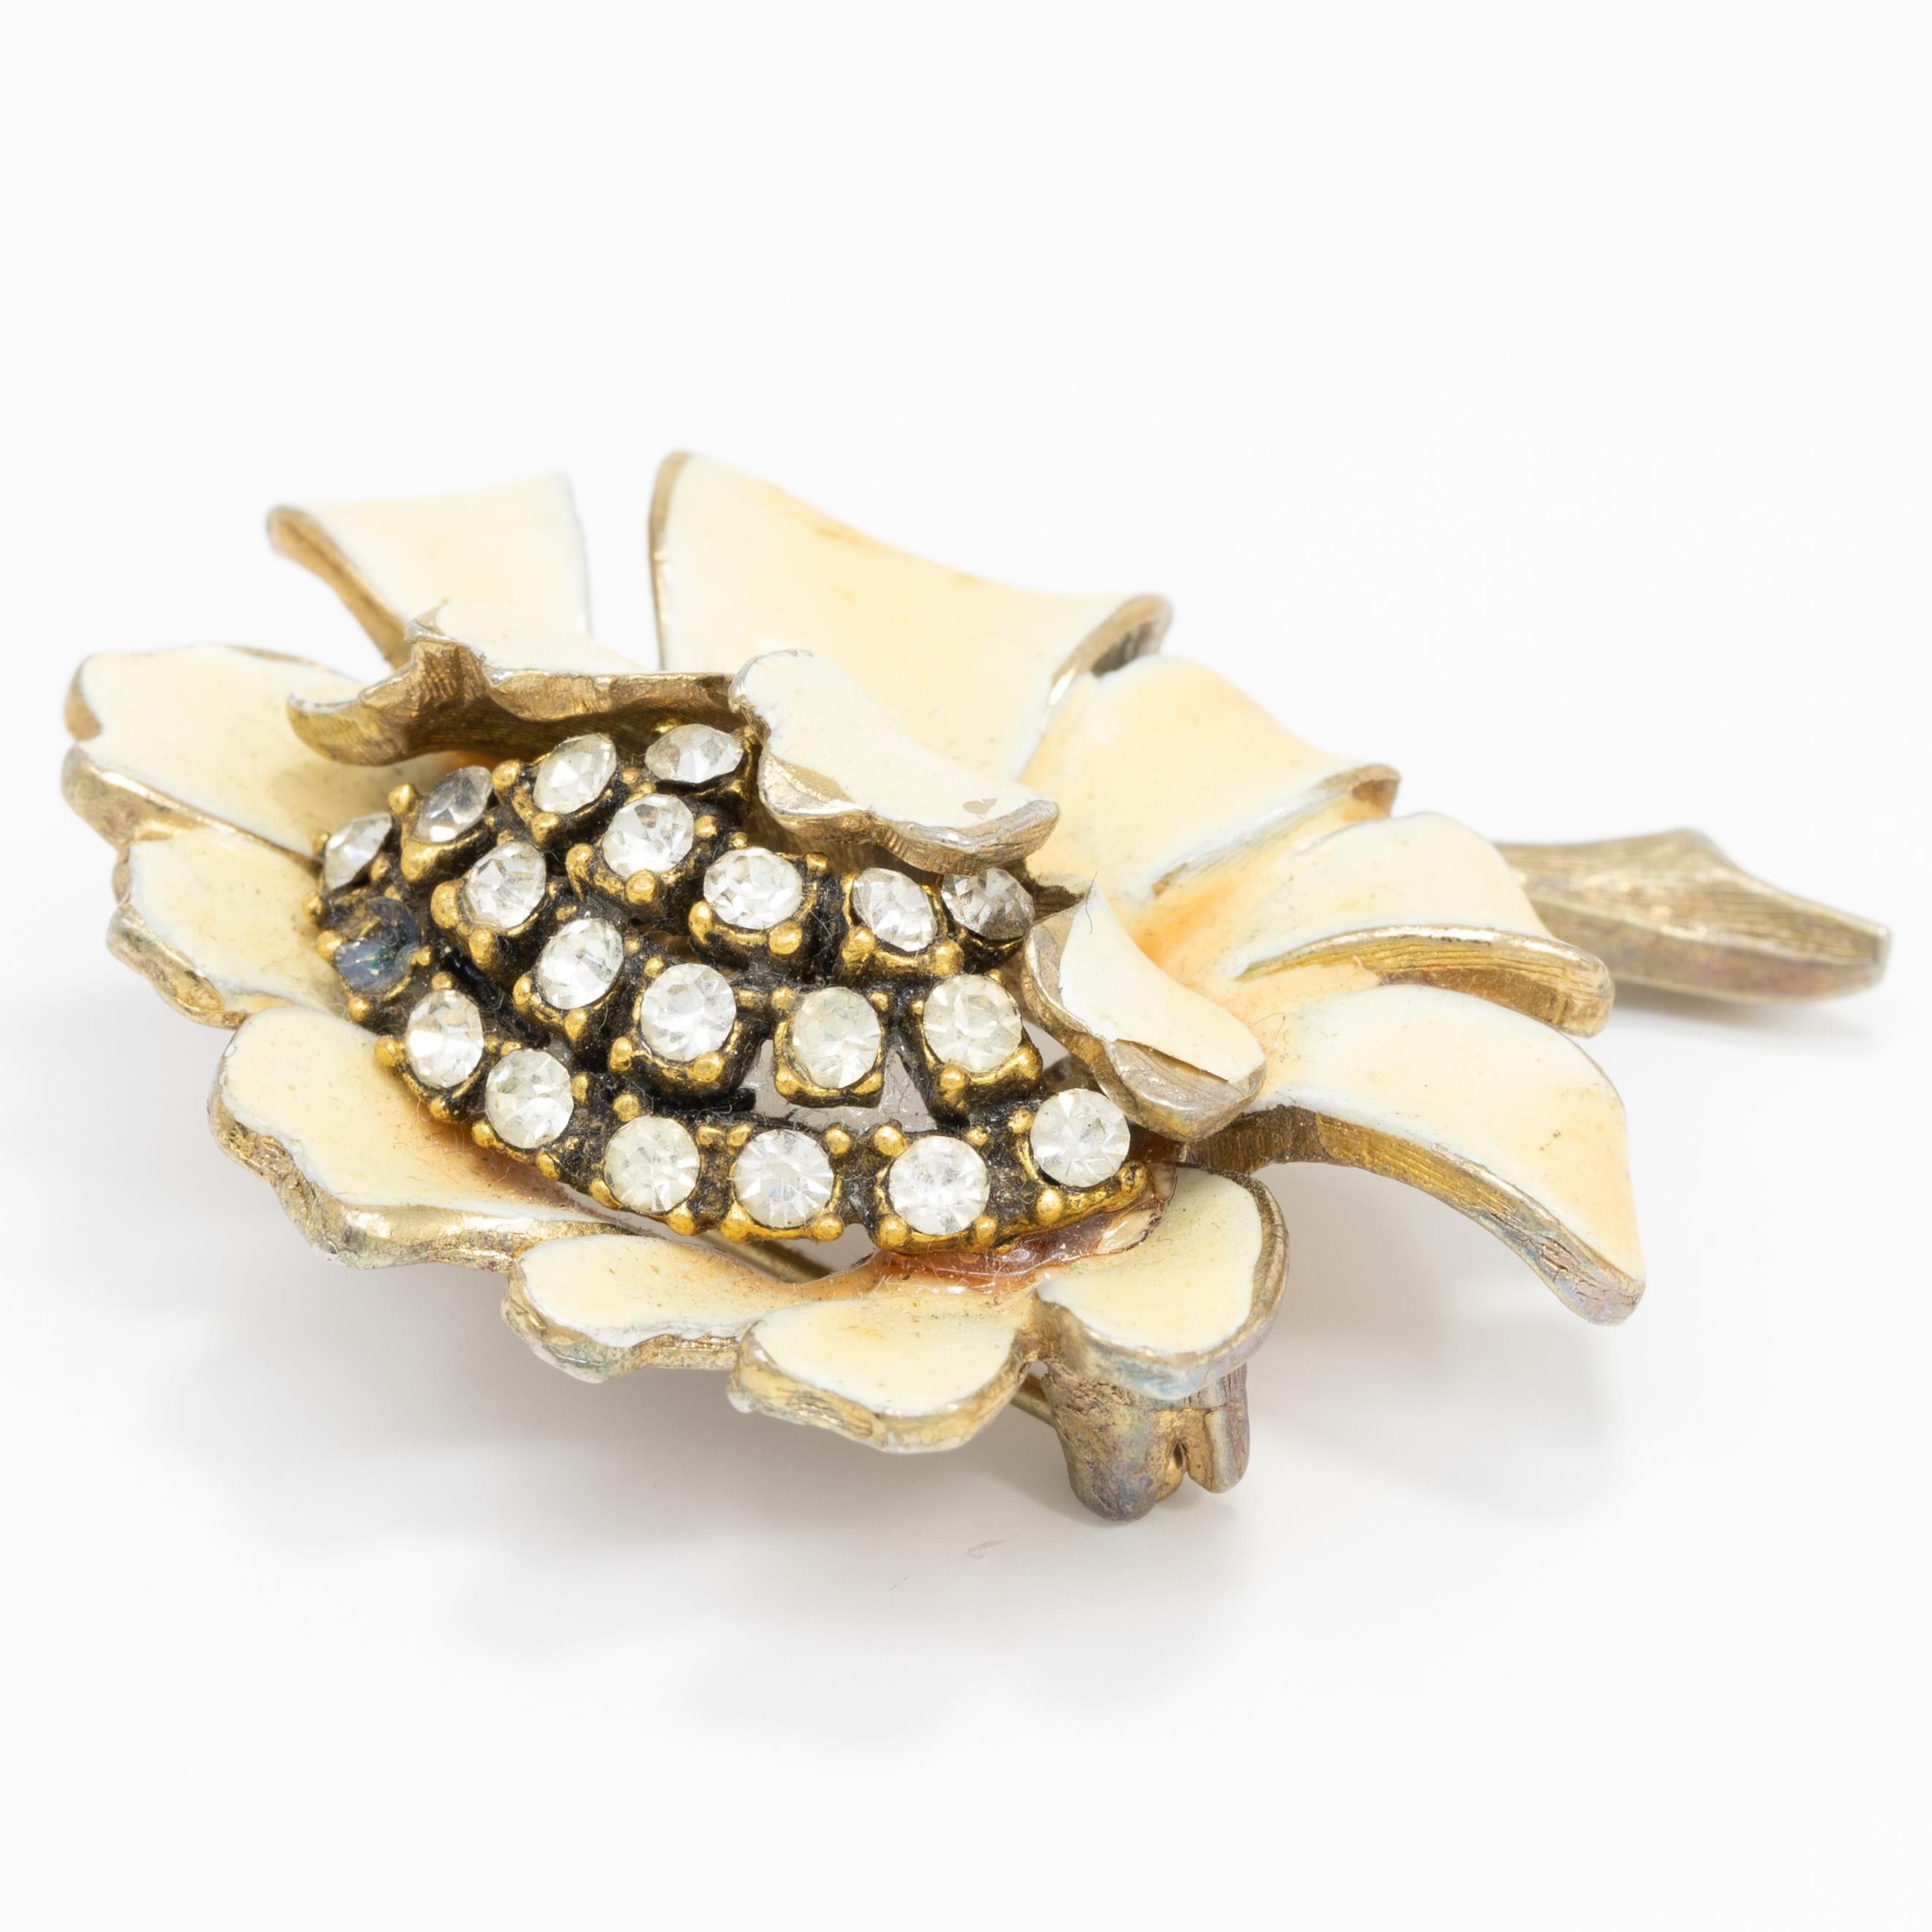 A blooming flower with a pave crystal center and petals painted in light yellow enamel.

Gold plated.

Marks / Hallmarks: HAR